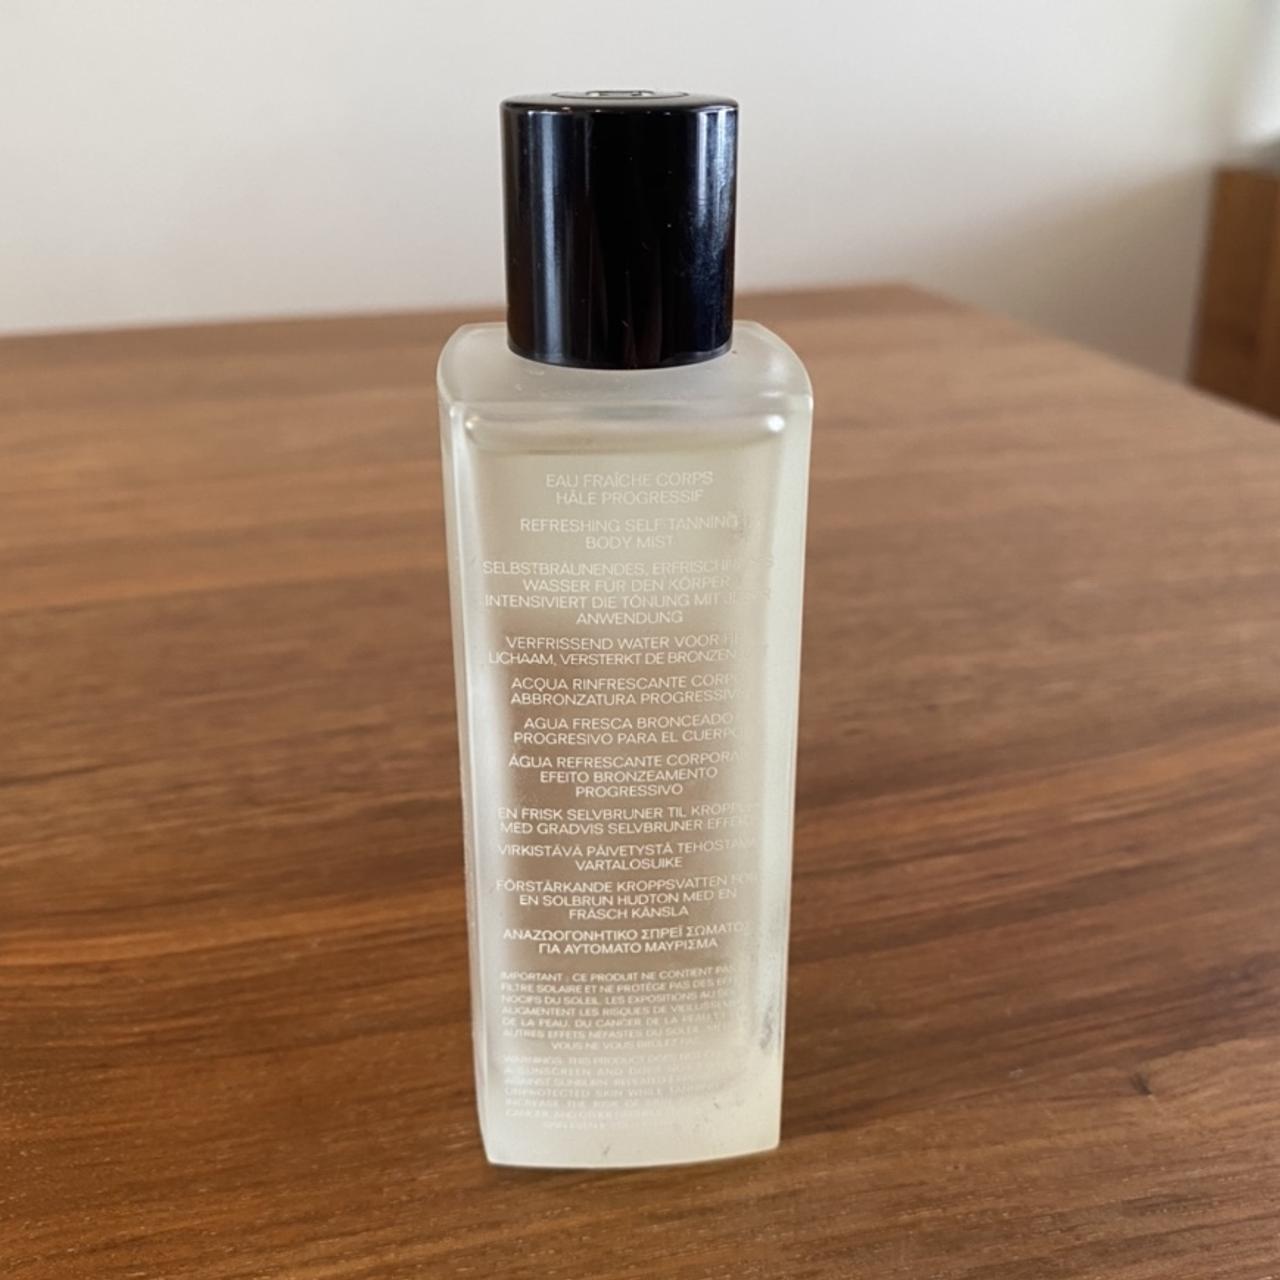 Chanel Skincare, New & Used